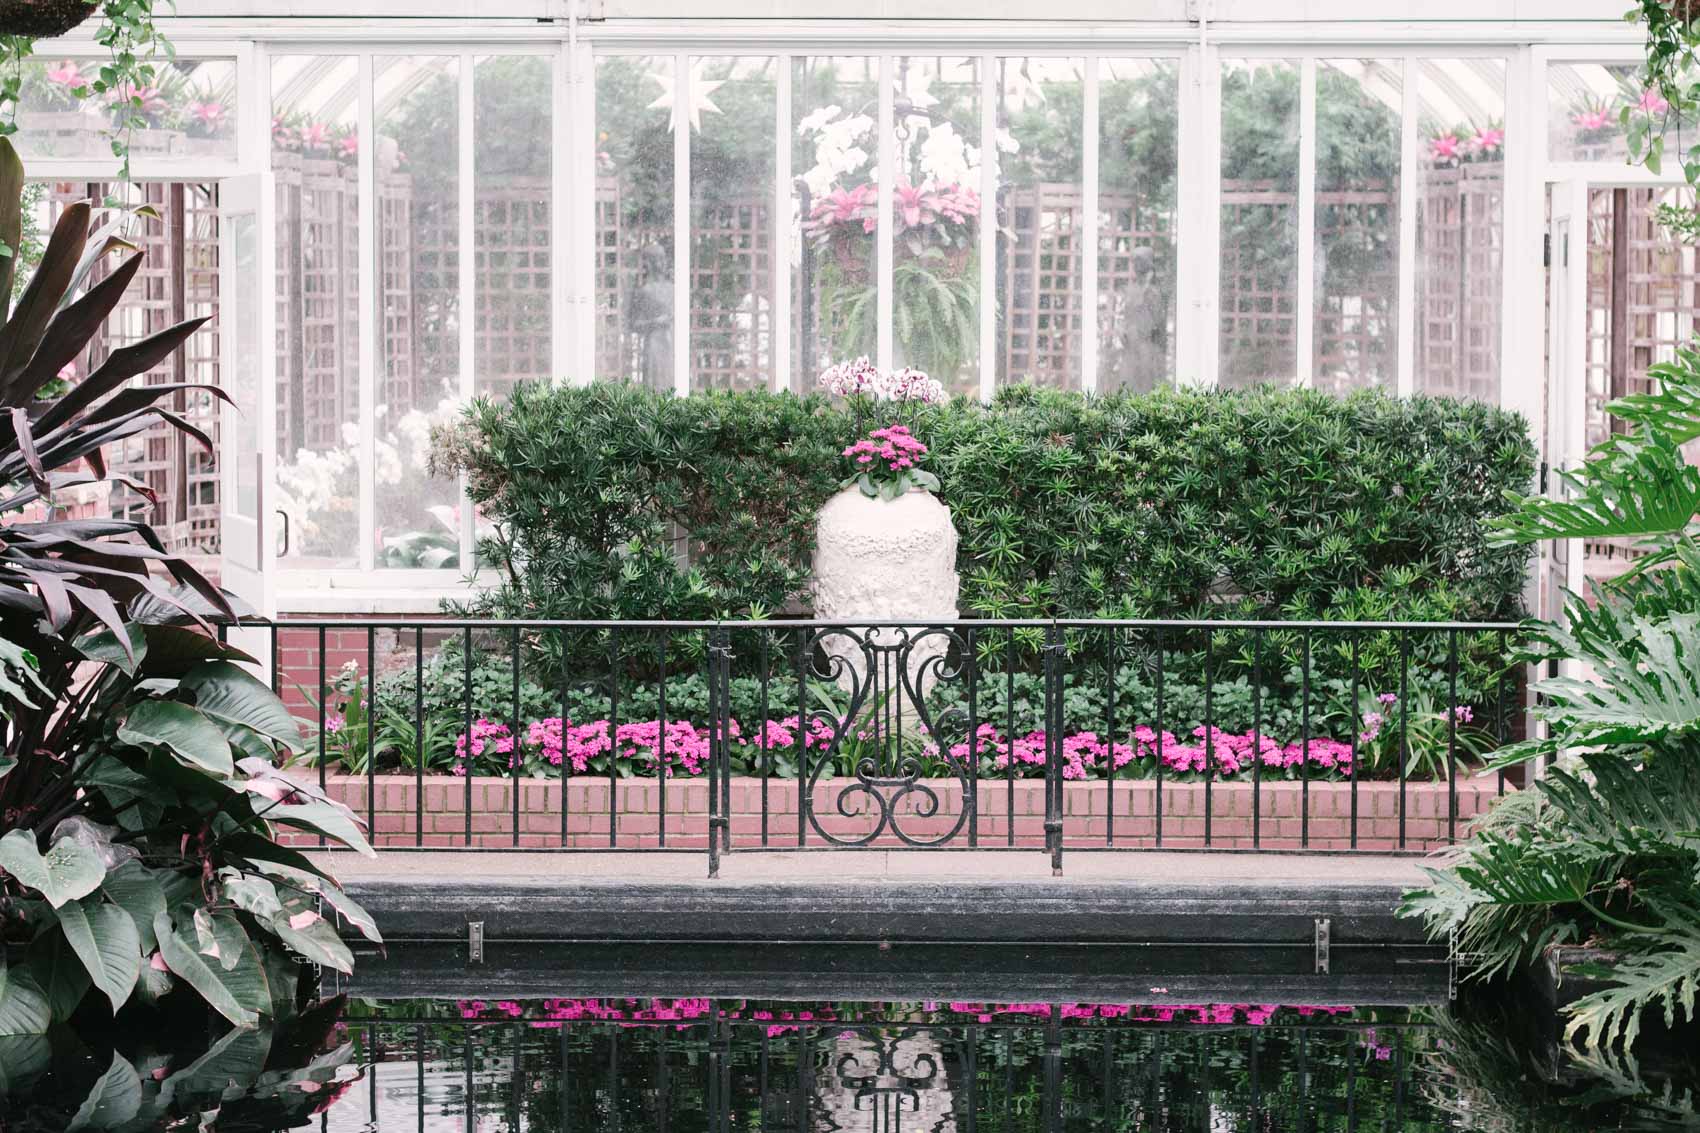 The cravings for the feelings that spring and summer give us are nearly insatiable during the fall and winter months, but we found a delightful sliver of that feeling at Phipps Conservatory and Botanical Gardens! There are no words to do it justice (photos help), so we strongly encourage planning your own visit!